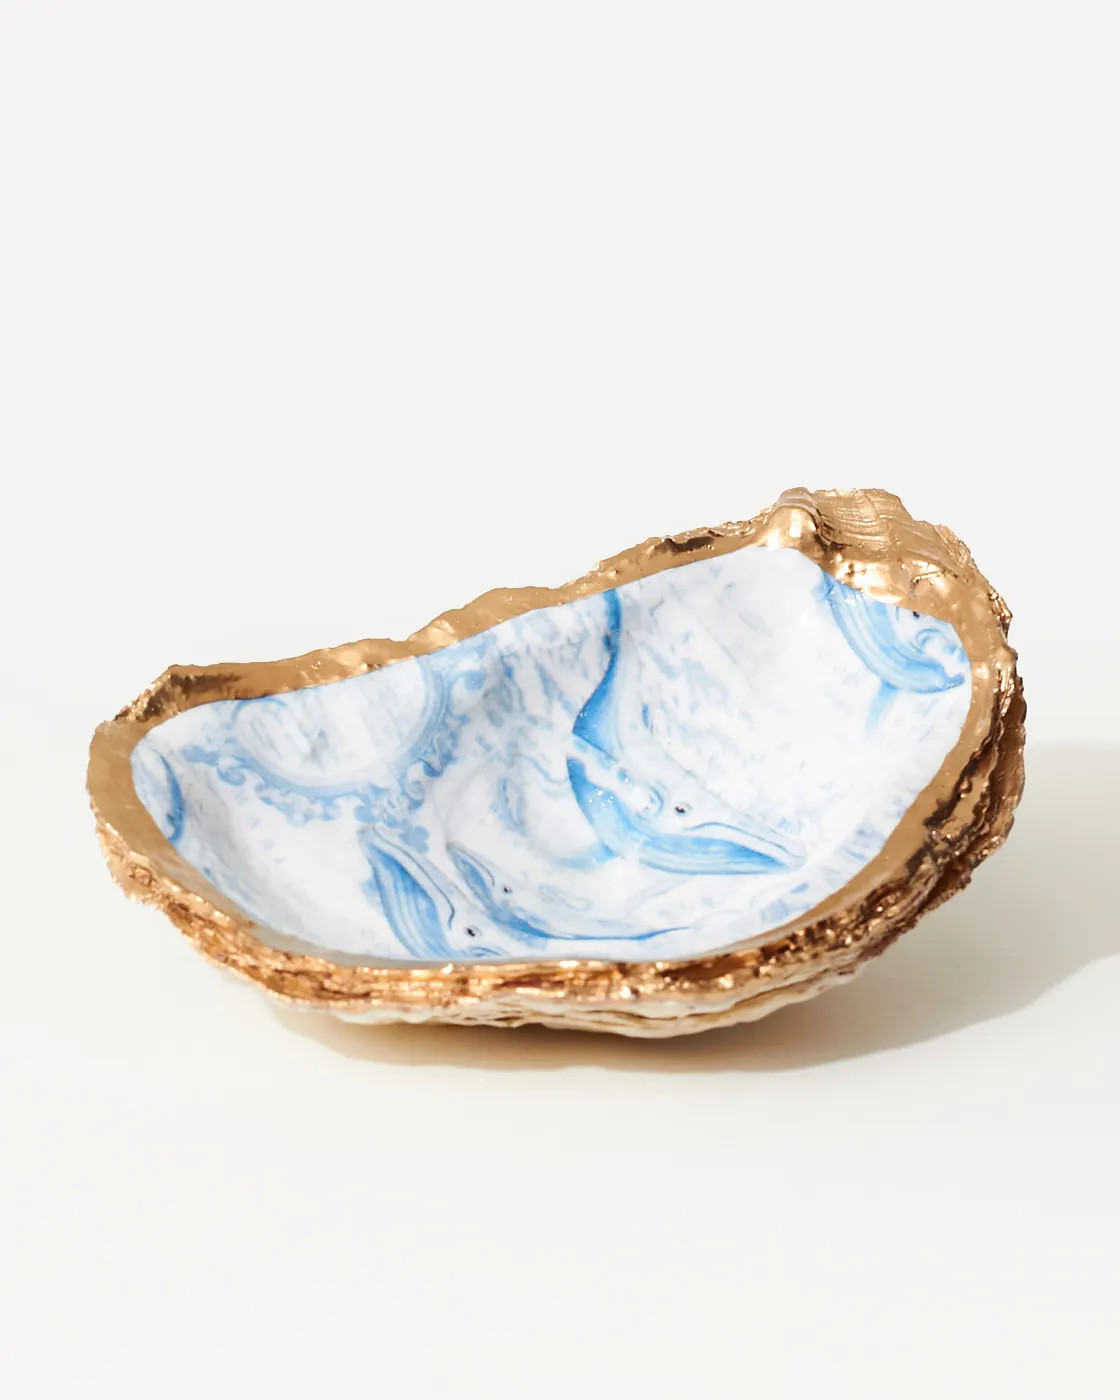 Humpback Whale Oyster Jewelry Dish